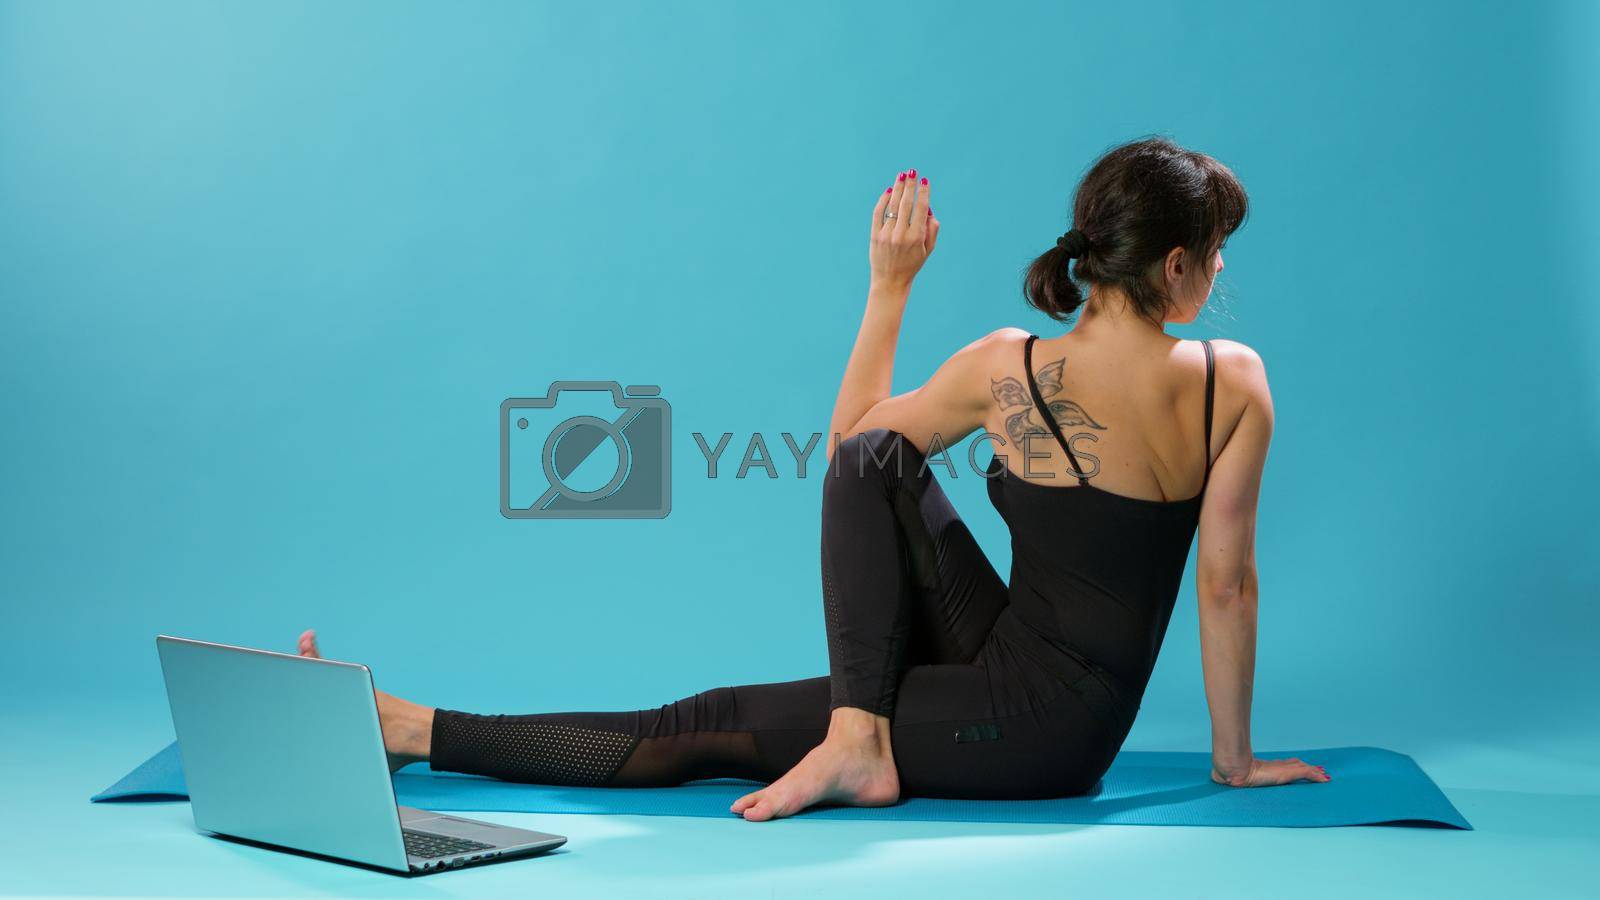 Active person stretching body muscles after fitness training, looking at online pilates video on laptop. Woman using wellness lesson to stretch arms and legs, recovering after workout activity.